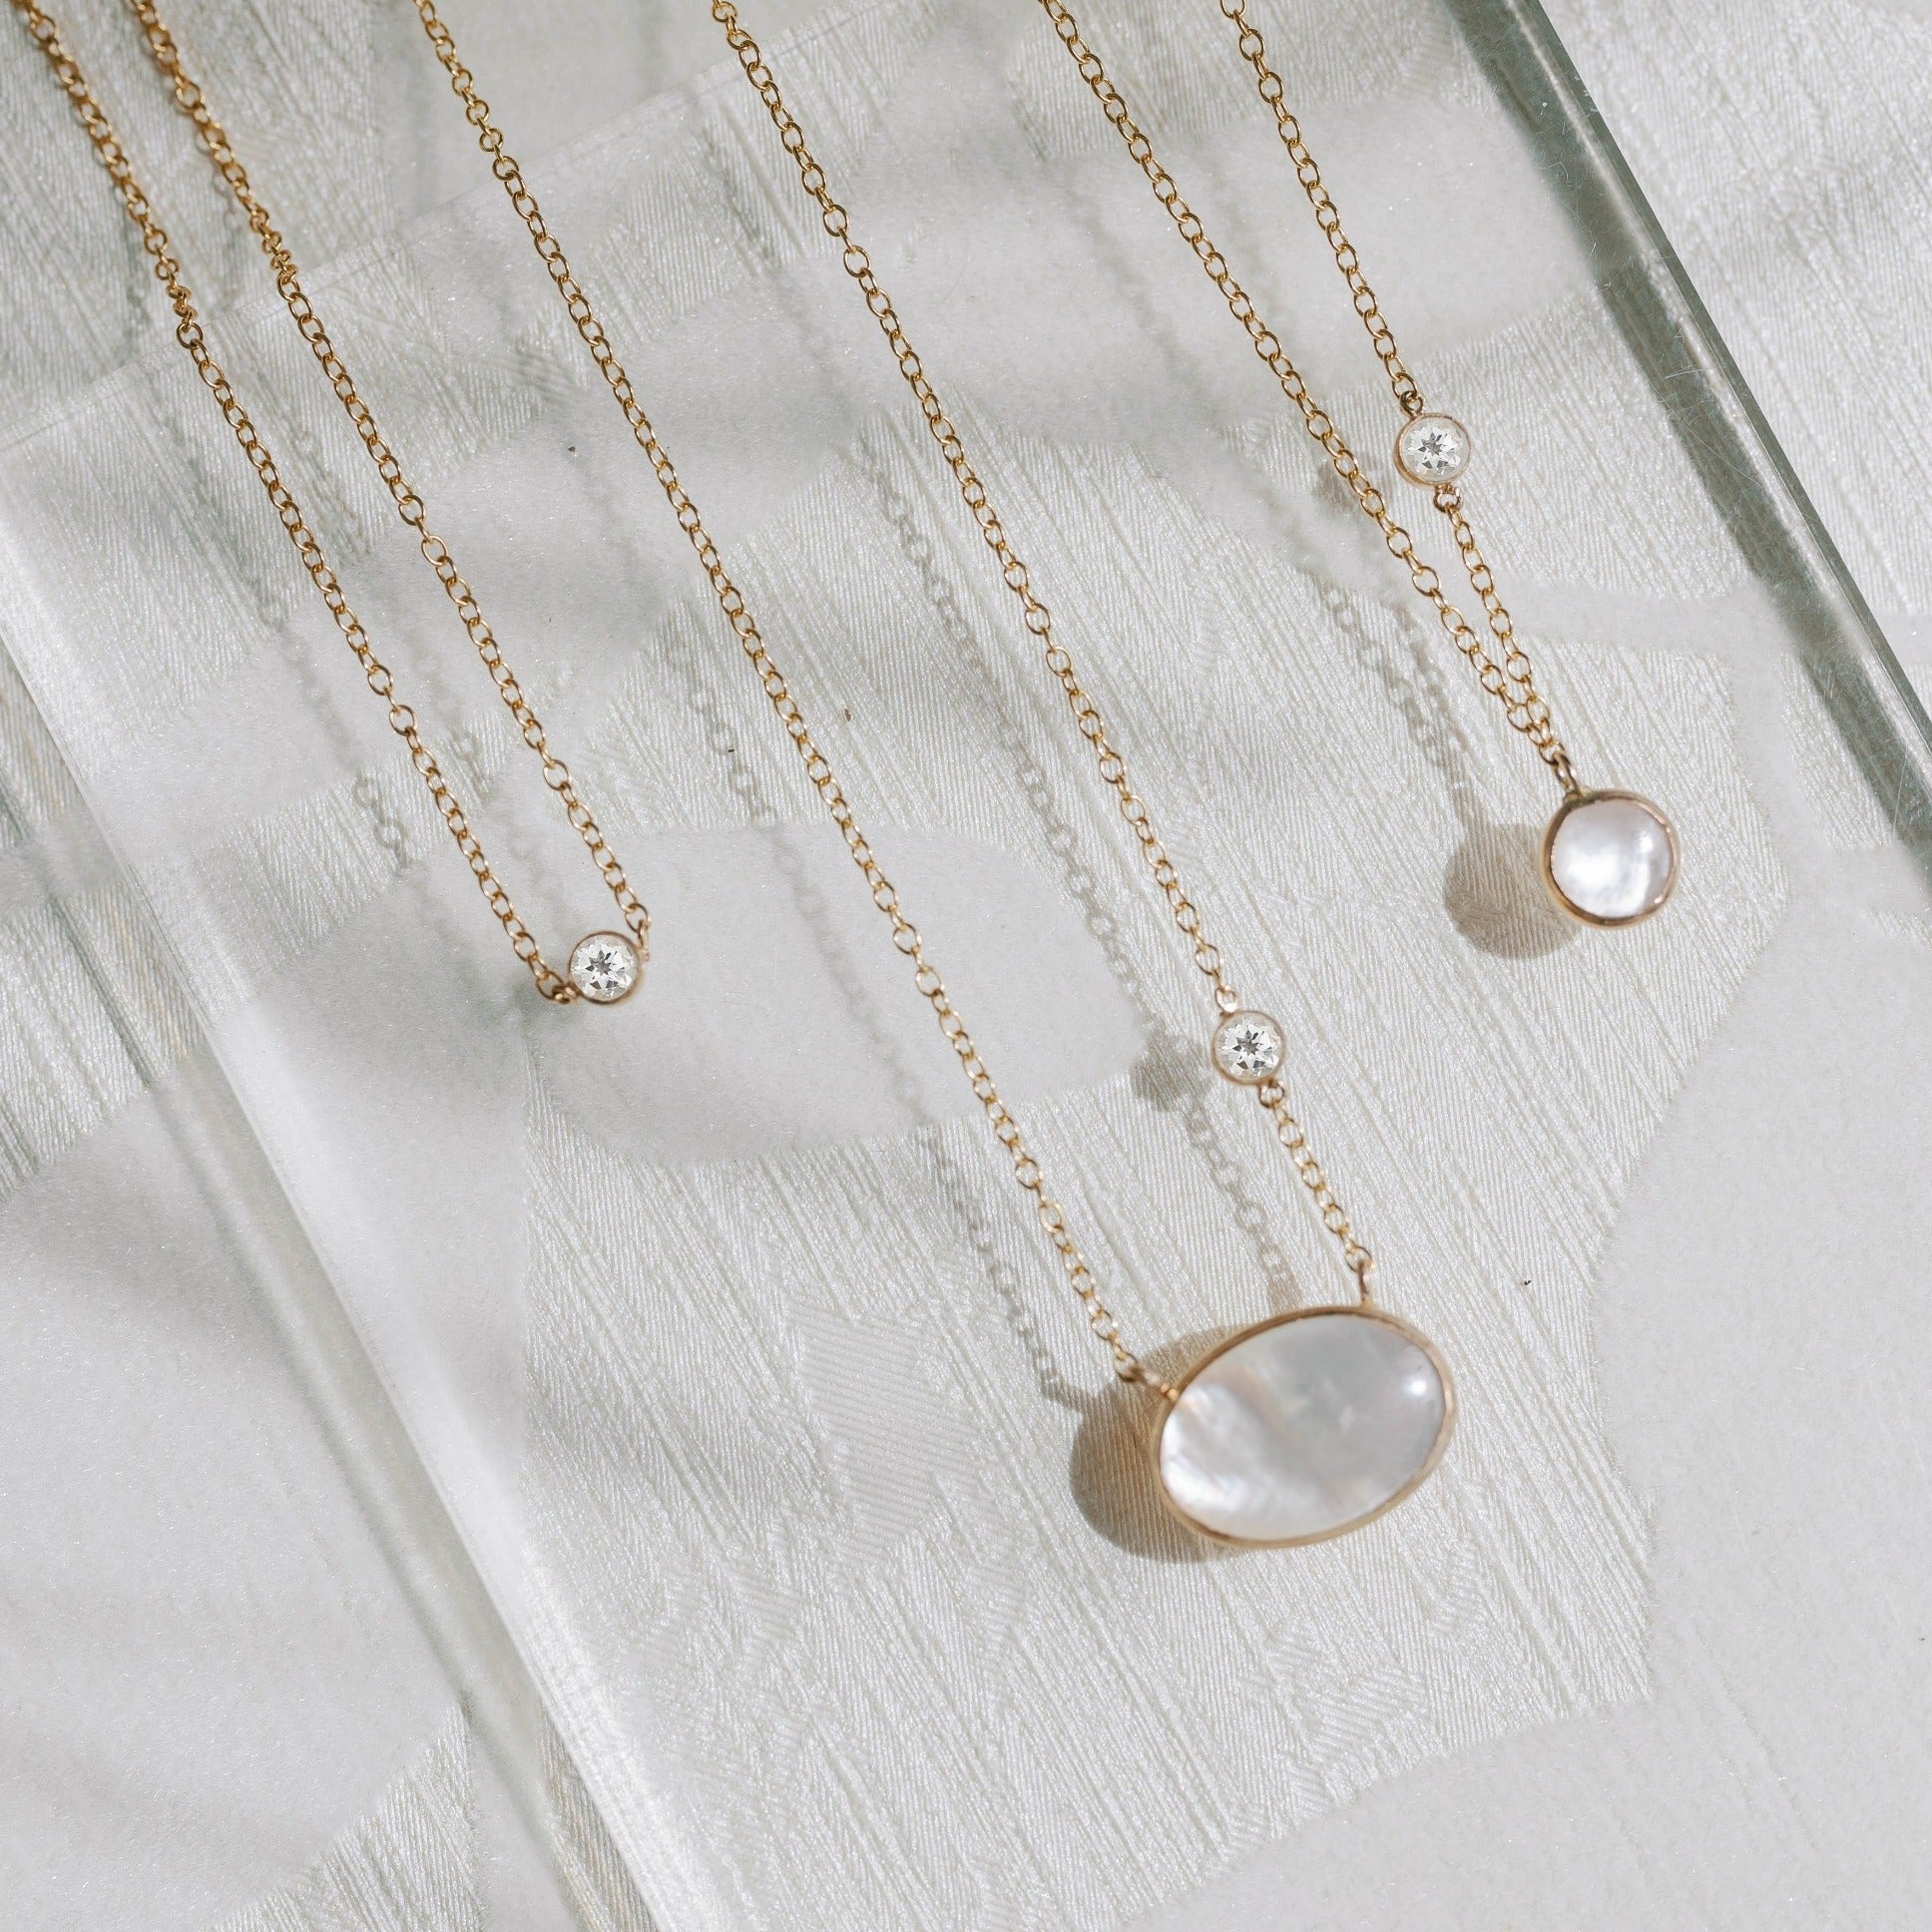 White topaz and mother of pearl necklaces made with recycled gold